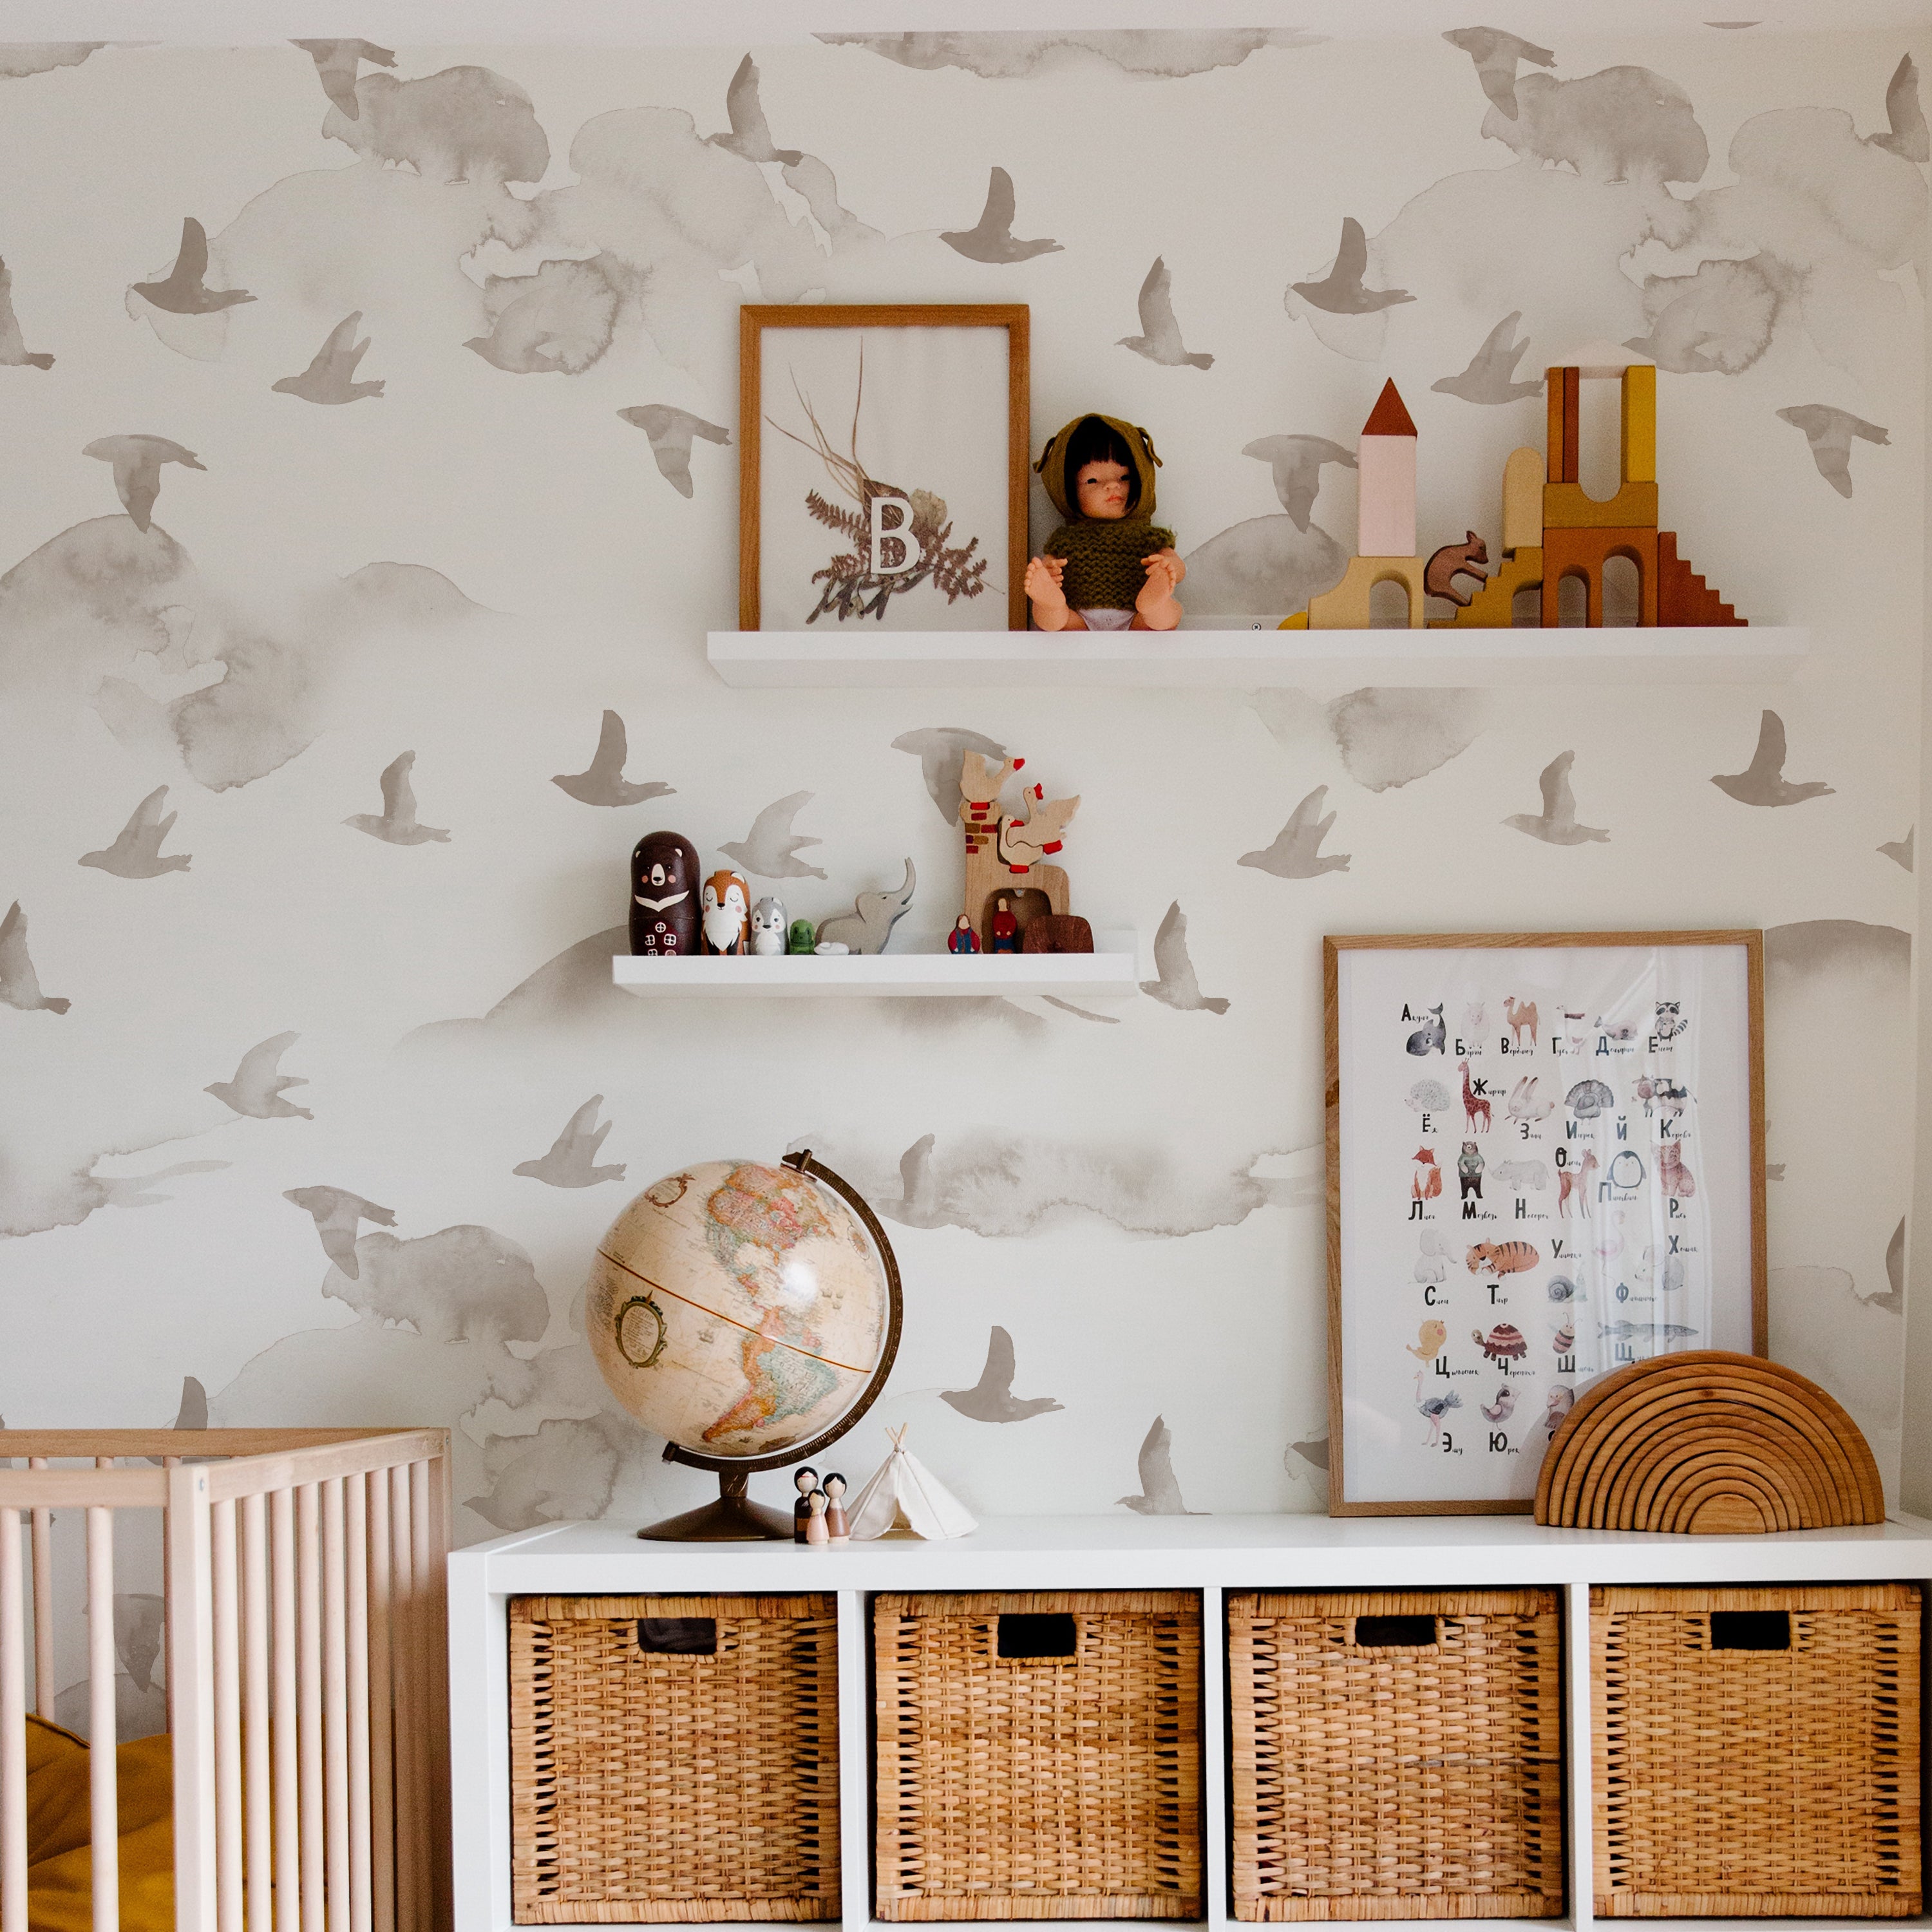 a cozy children's room decorated with the Kids Wild Pinery Wallpaper. The wallpaper's bird motifs provide a soothing, nature-inspired backdrop that complements the room's warm wooden furniture, including floating shelves adorned with toys and educational frames. The room is grounded by wicker storage baskets and a classic globe, fostering a nurturing environment for growth and learning.